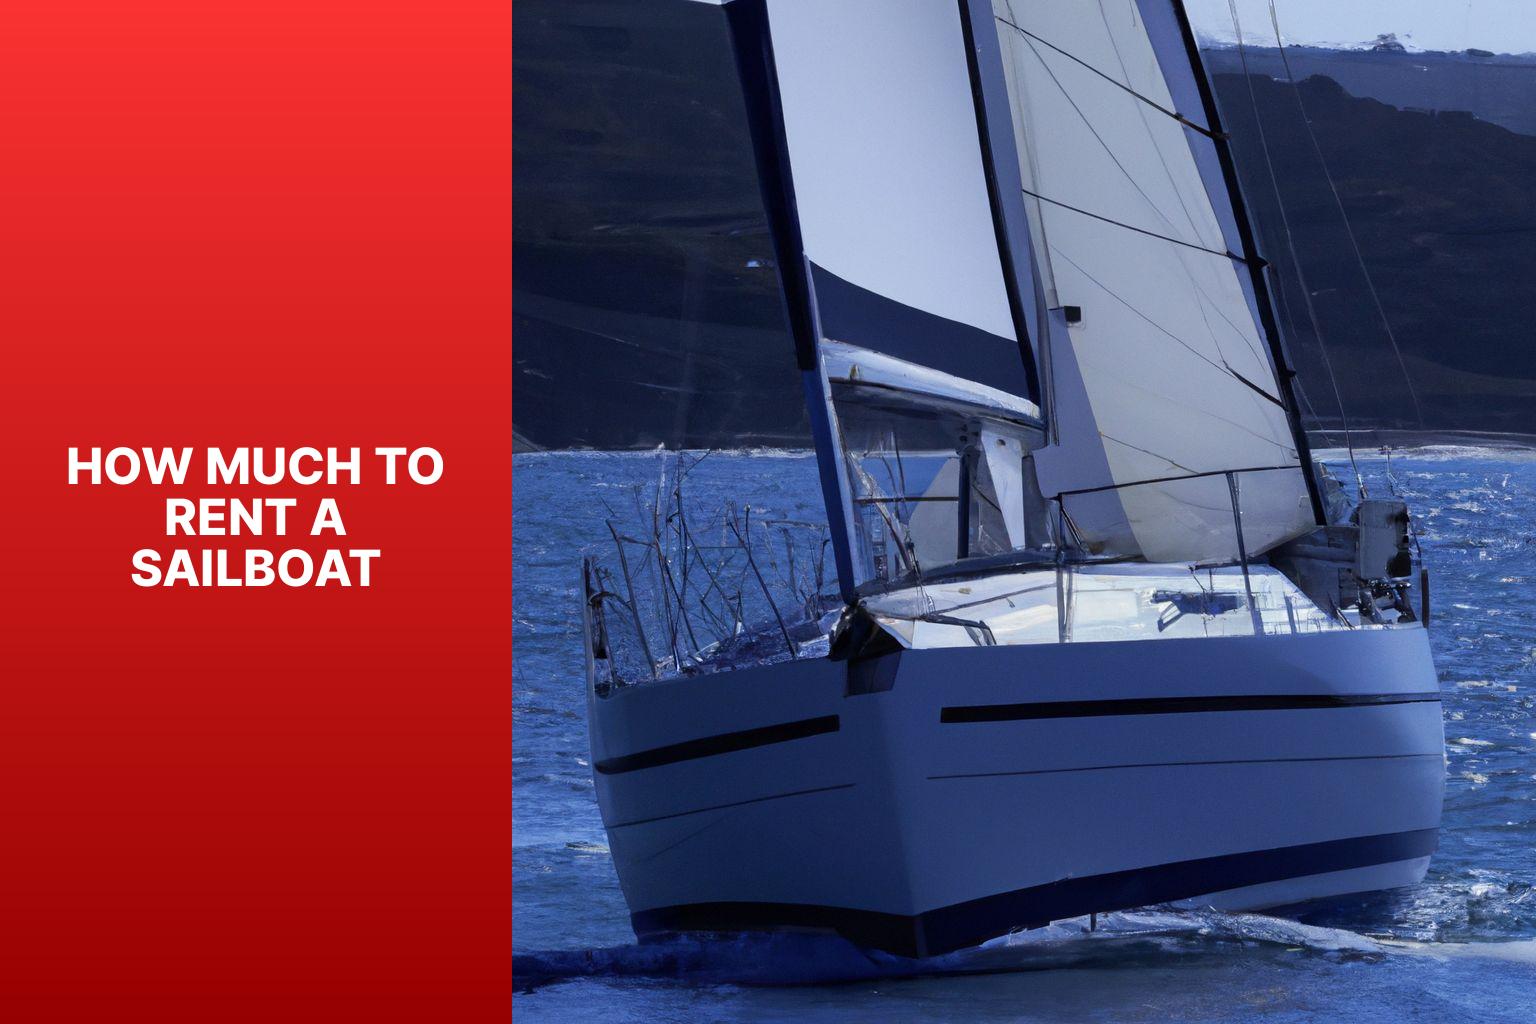 Sailboat Renting Costs: A Comprehensive Guide to Find the Perfect Price